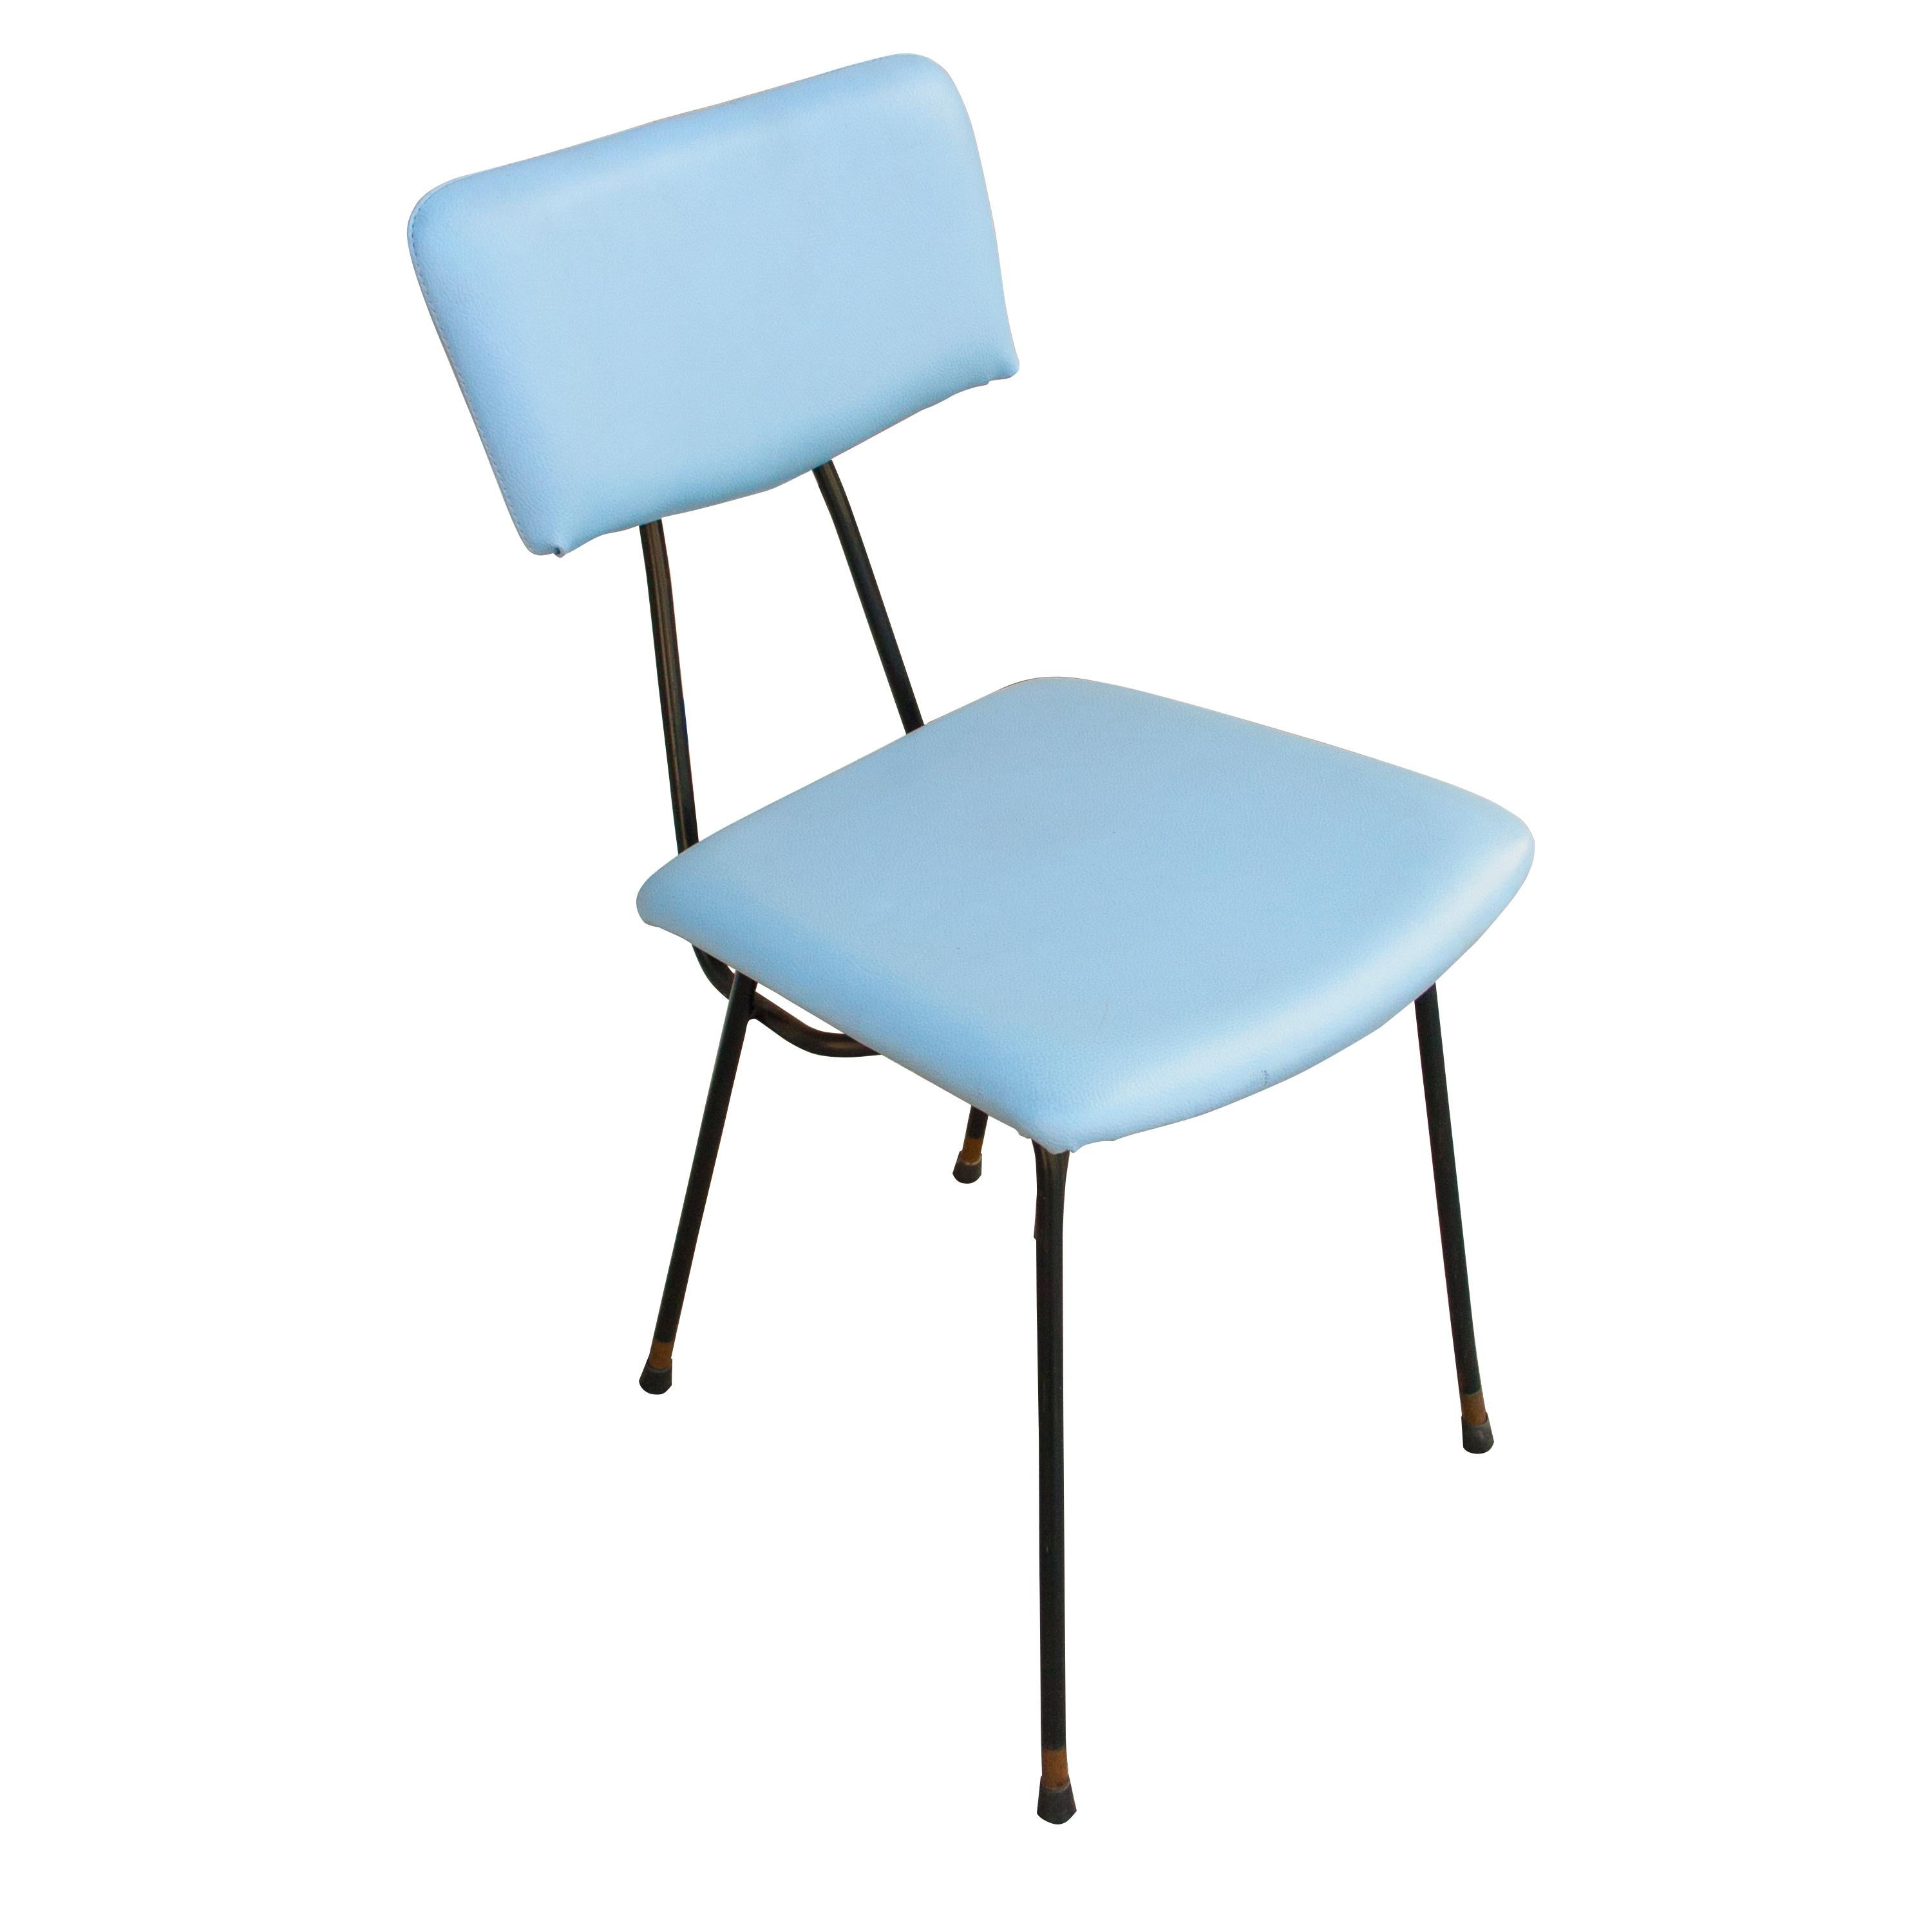 Set of ten Italian chairs designed by Luigi Scremin (1897-1983). They are compose of a black lacquered structure made of curved iron rod with handmade upholstery in light blue synthetic leather over a wooden board.